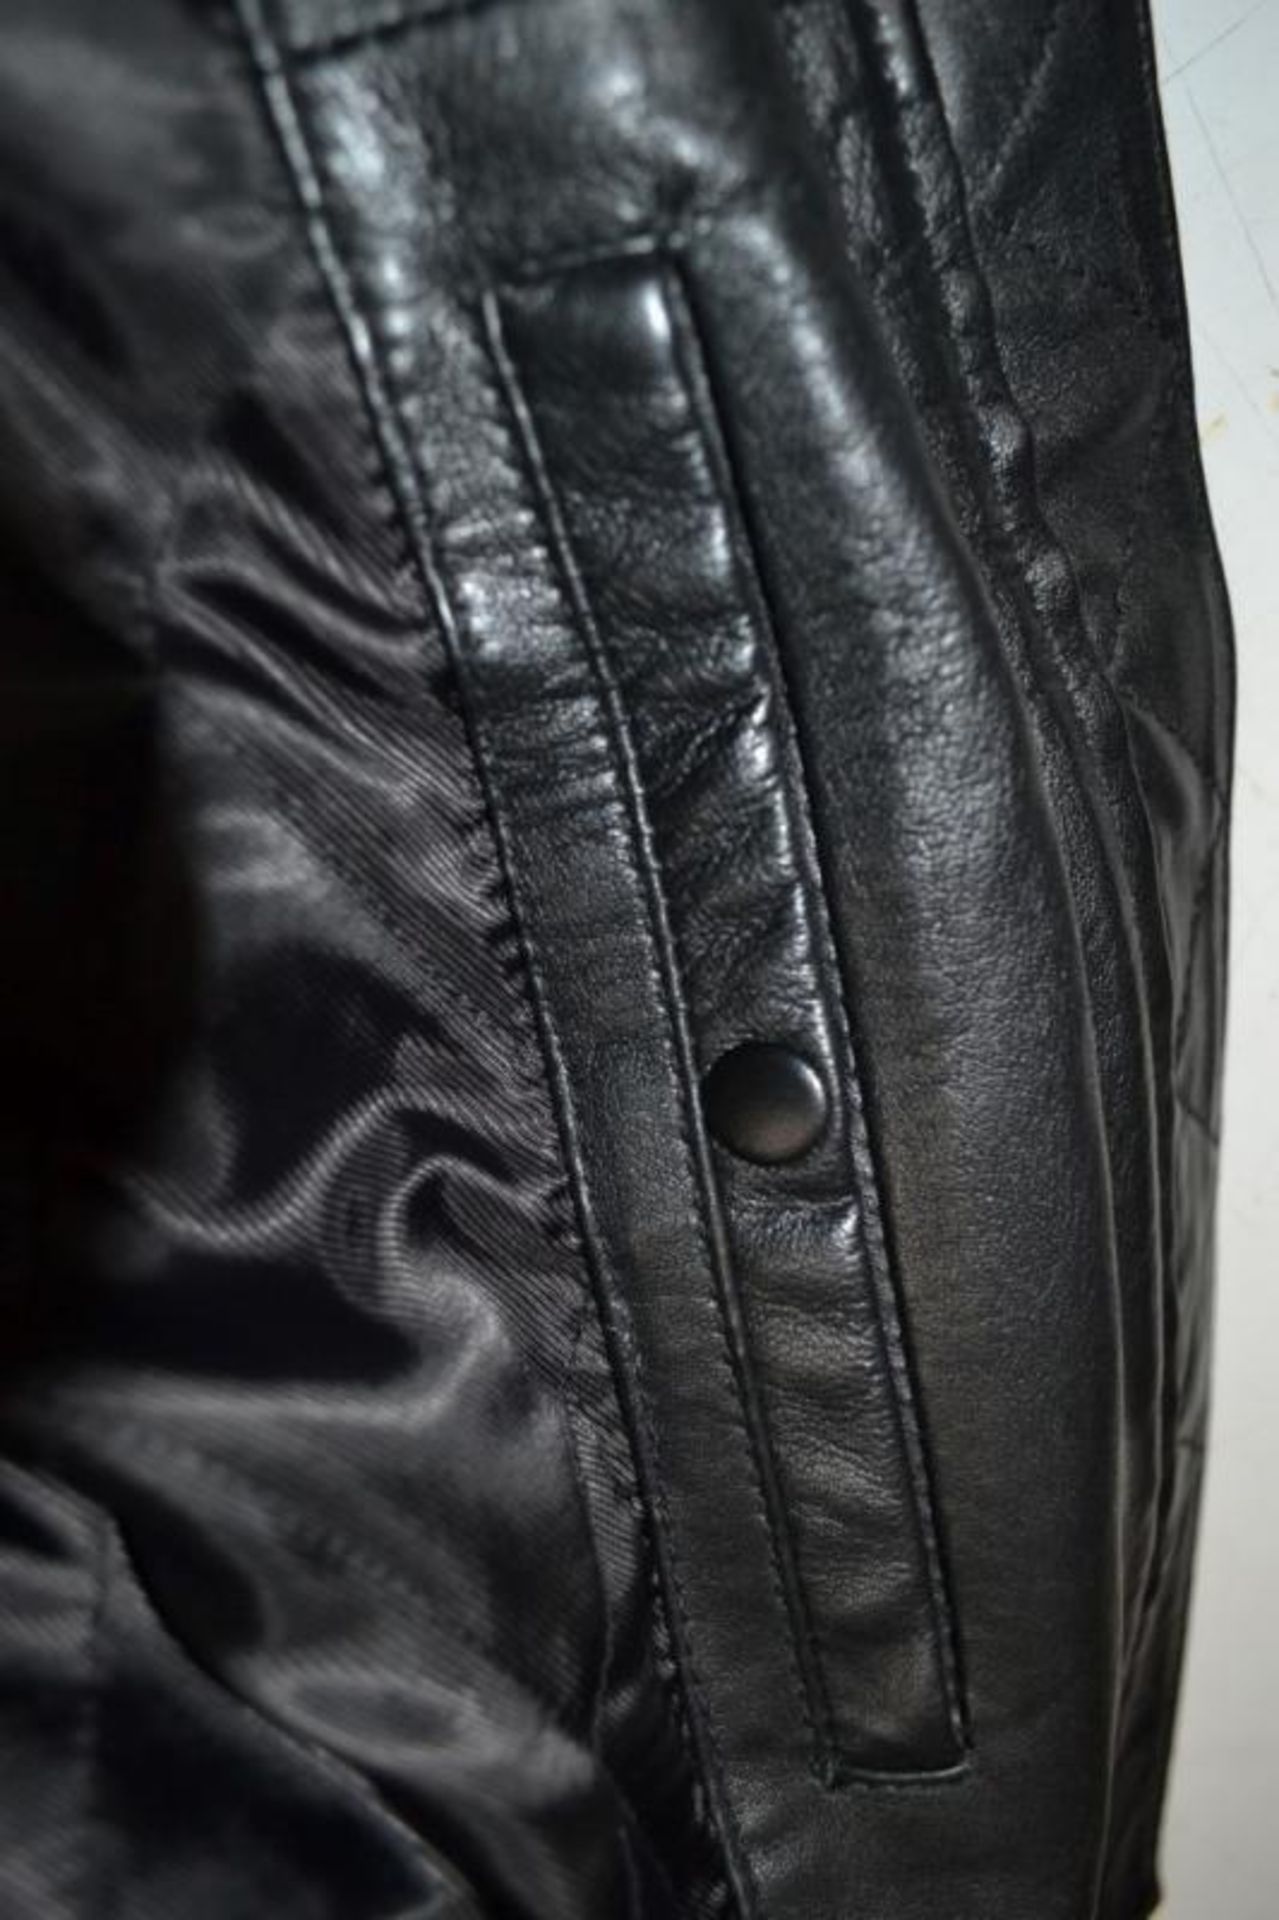 1 x GNIOUS "Black Label" Mens Lamb Nappa Leather Coat - Design: Victory - New Stock With Tags - Rece - Image 3 of 3